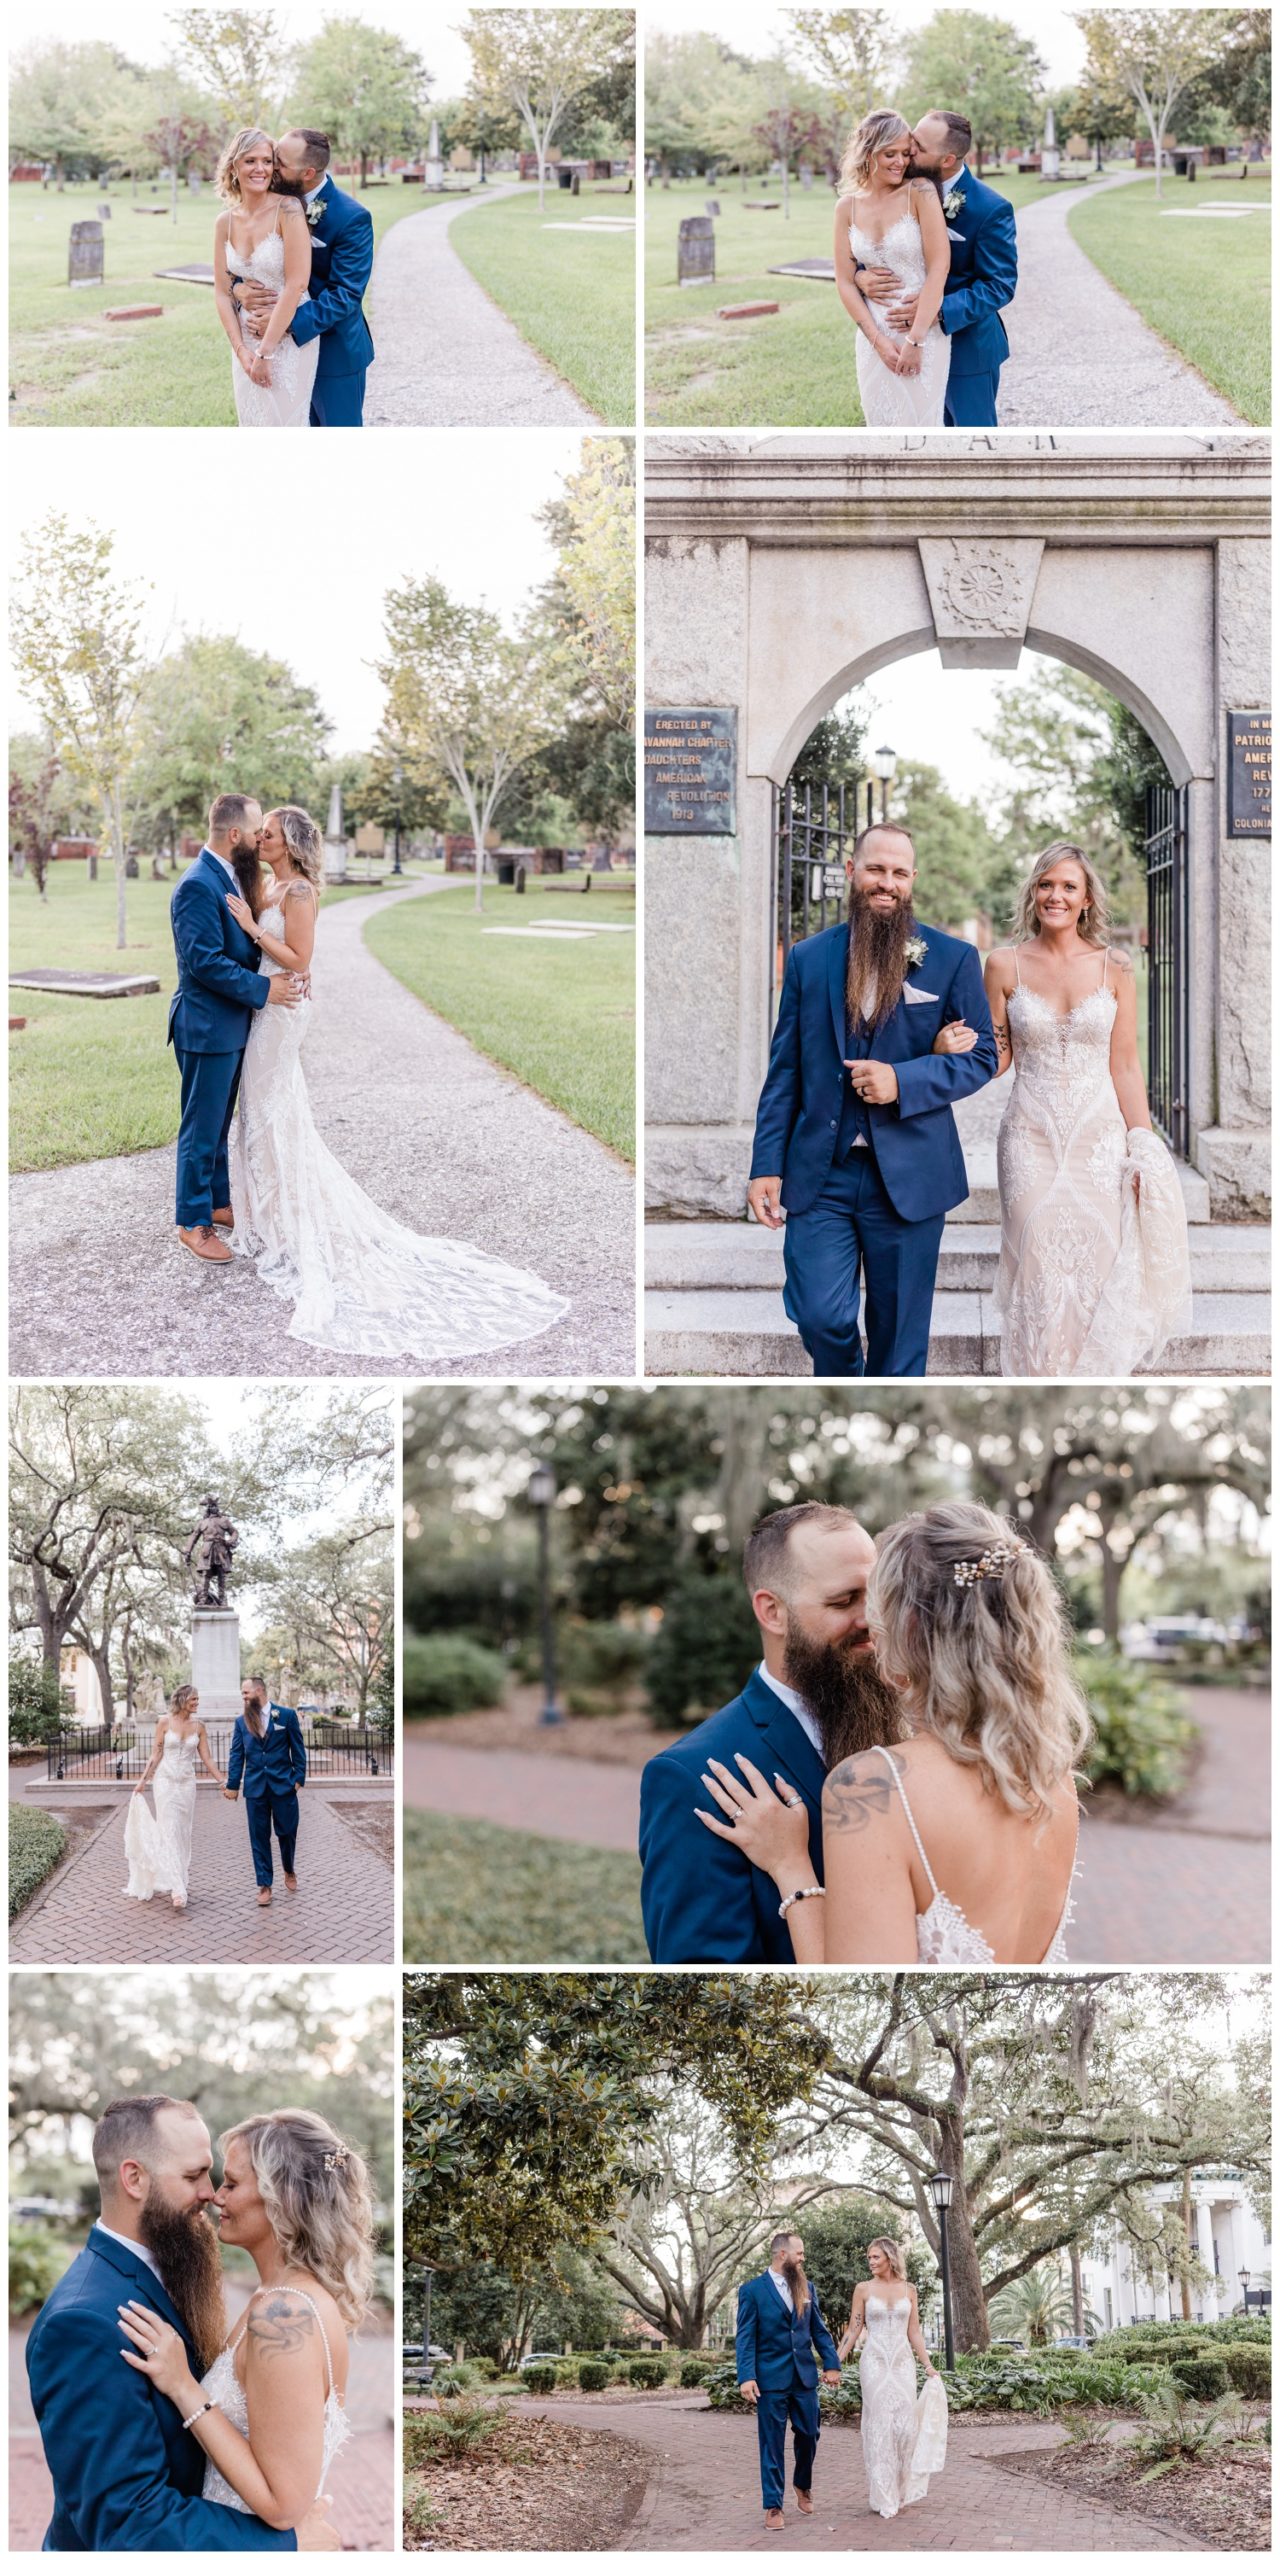 taylor brown photography - Elopement at Colonial Park Cemetery - makeup and hair by royal makeup and hair